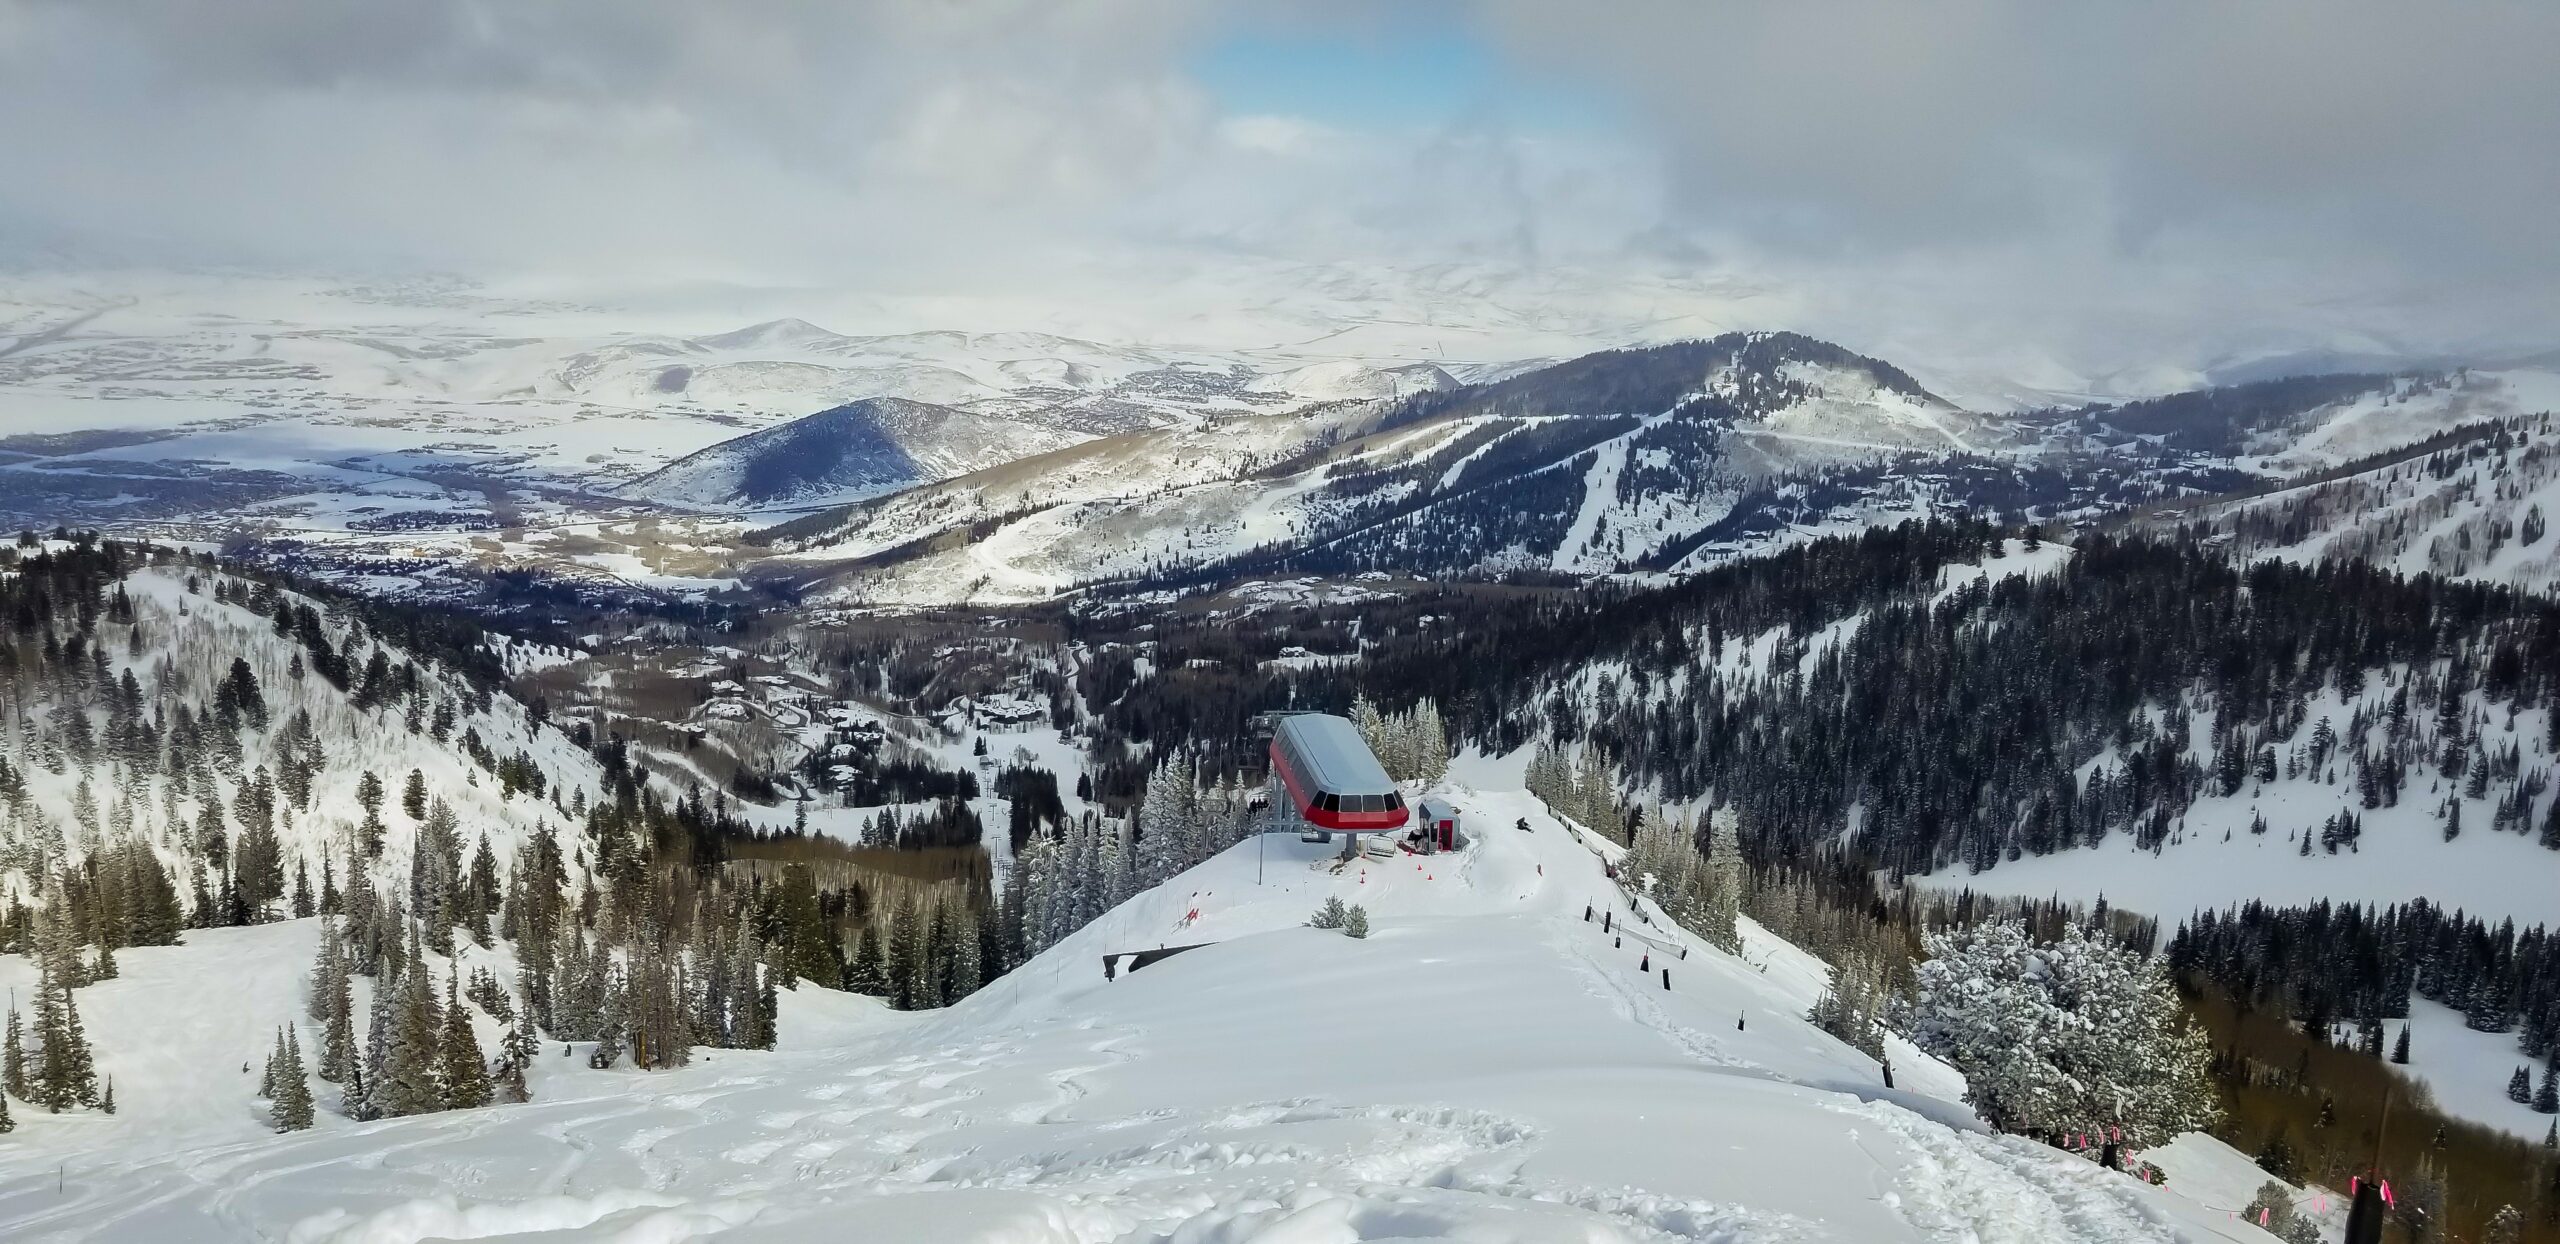 Park City companies are combating inflation by providing Park City employee housing, increasing wages, and launching training programs.